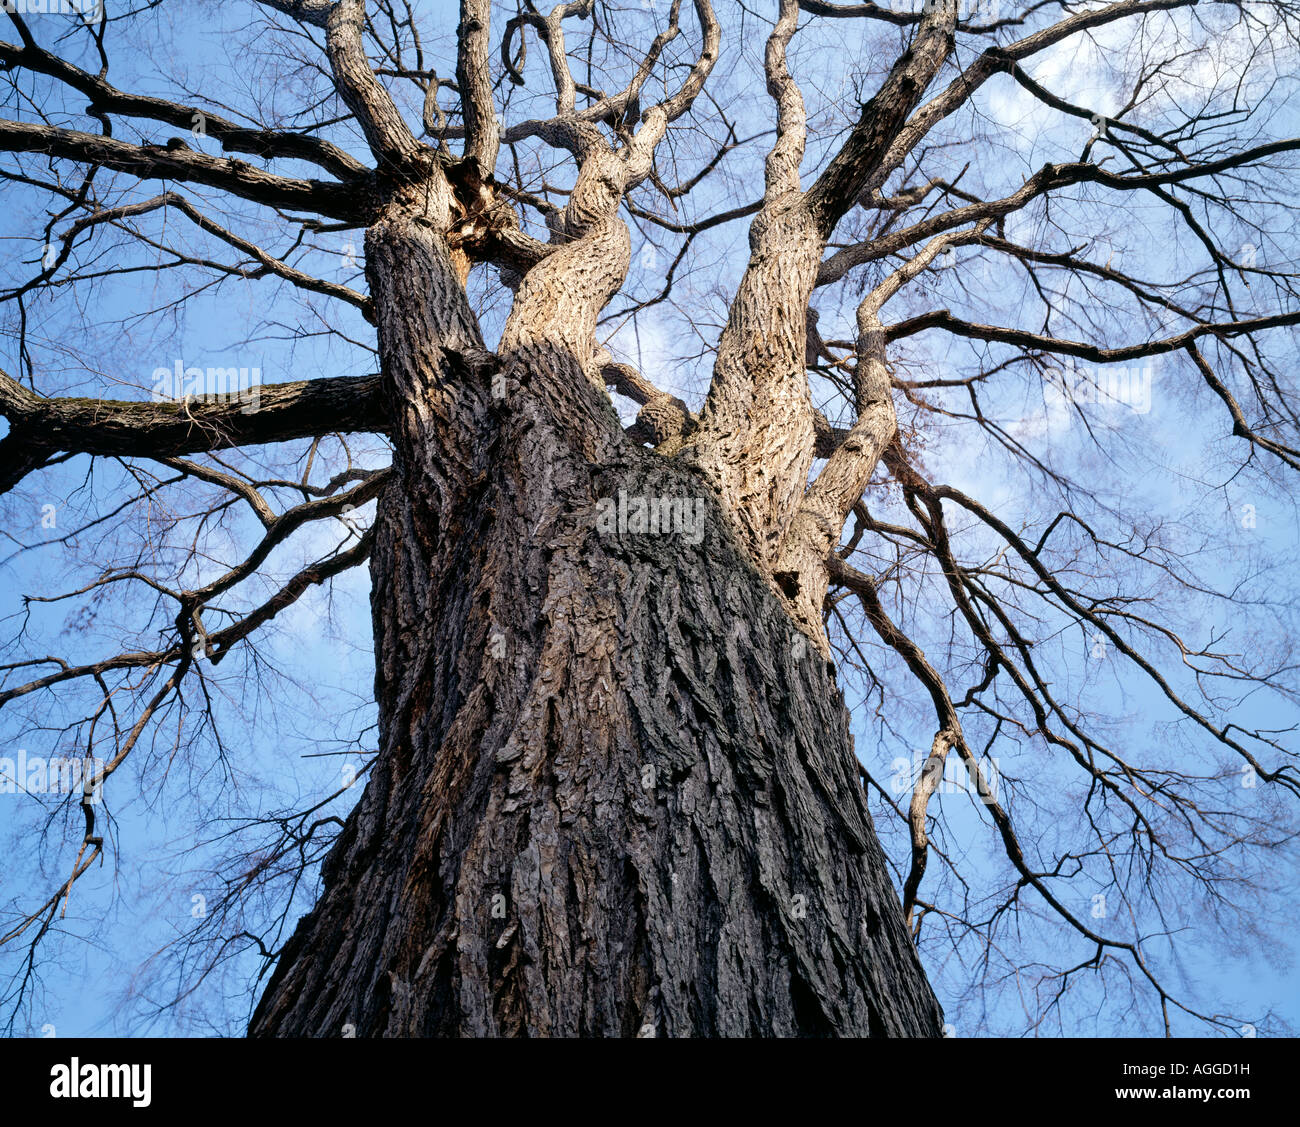 American Elm Tree Stock Photos And American Elm Tree Stock Images Alamy